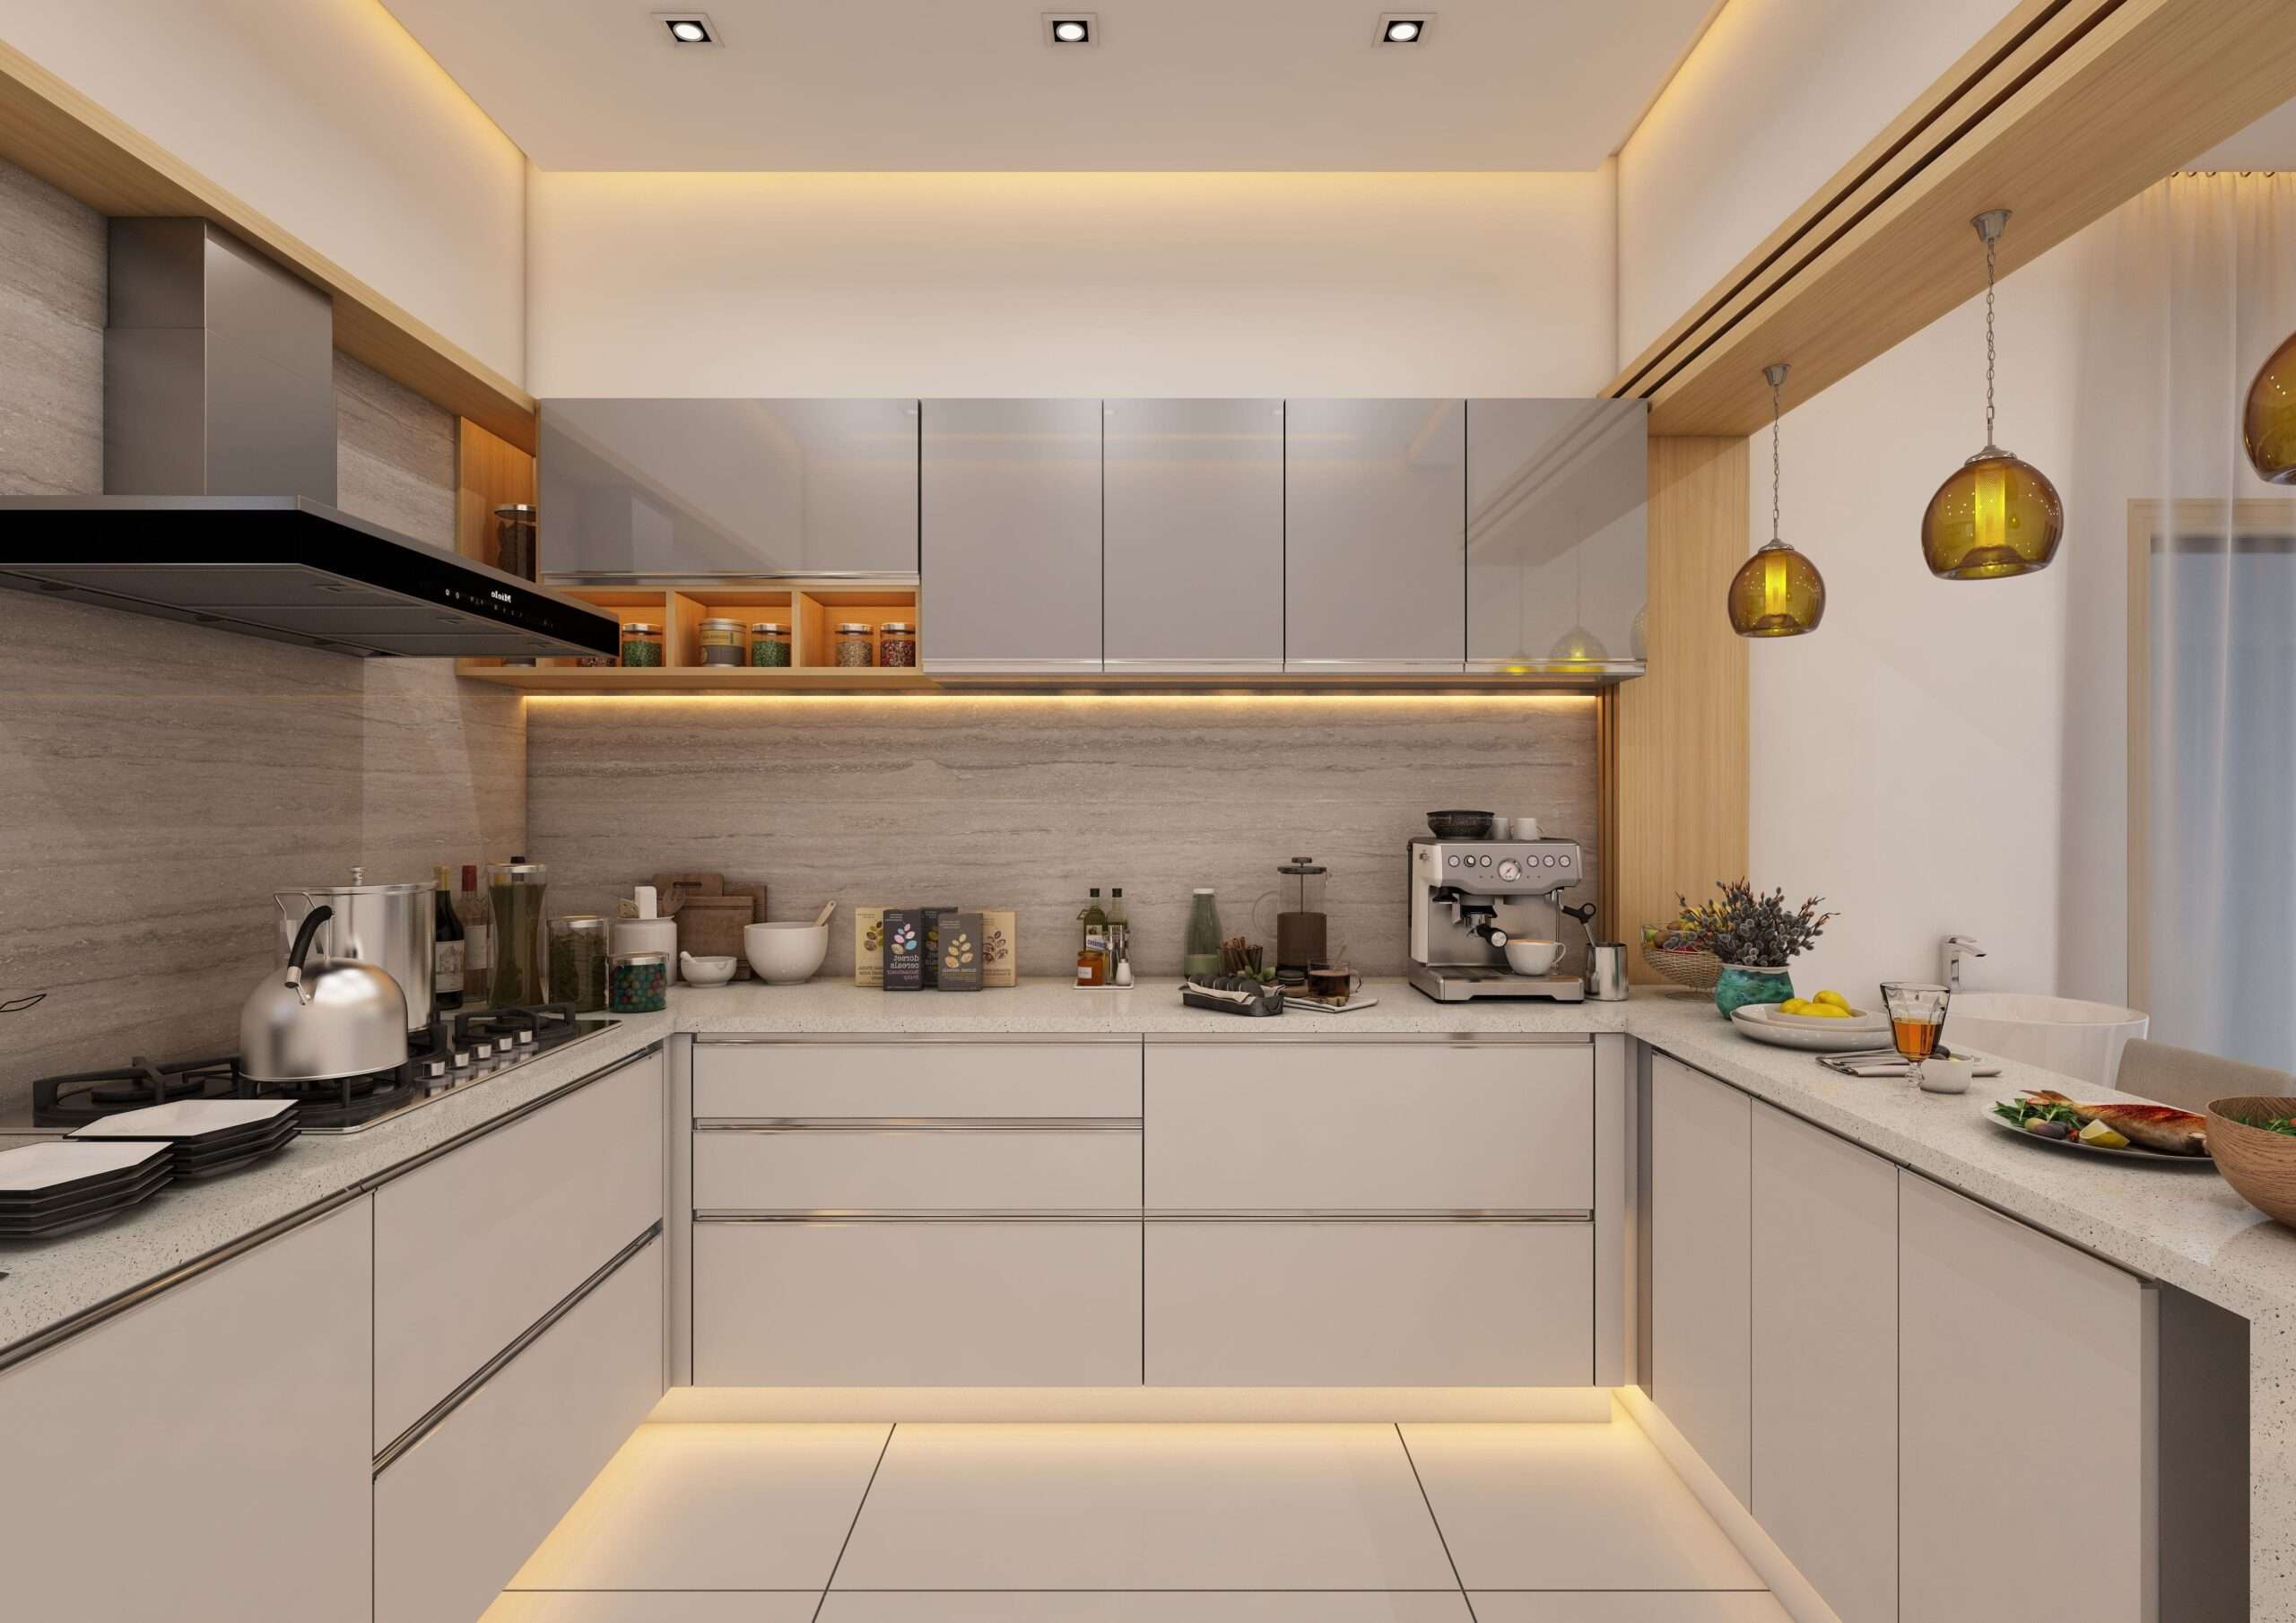 Modern design meets maximum functionality in our modern kitchen.